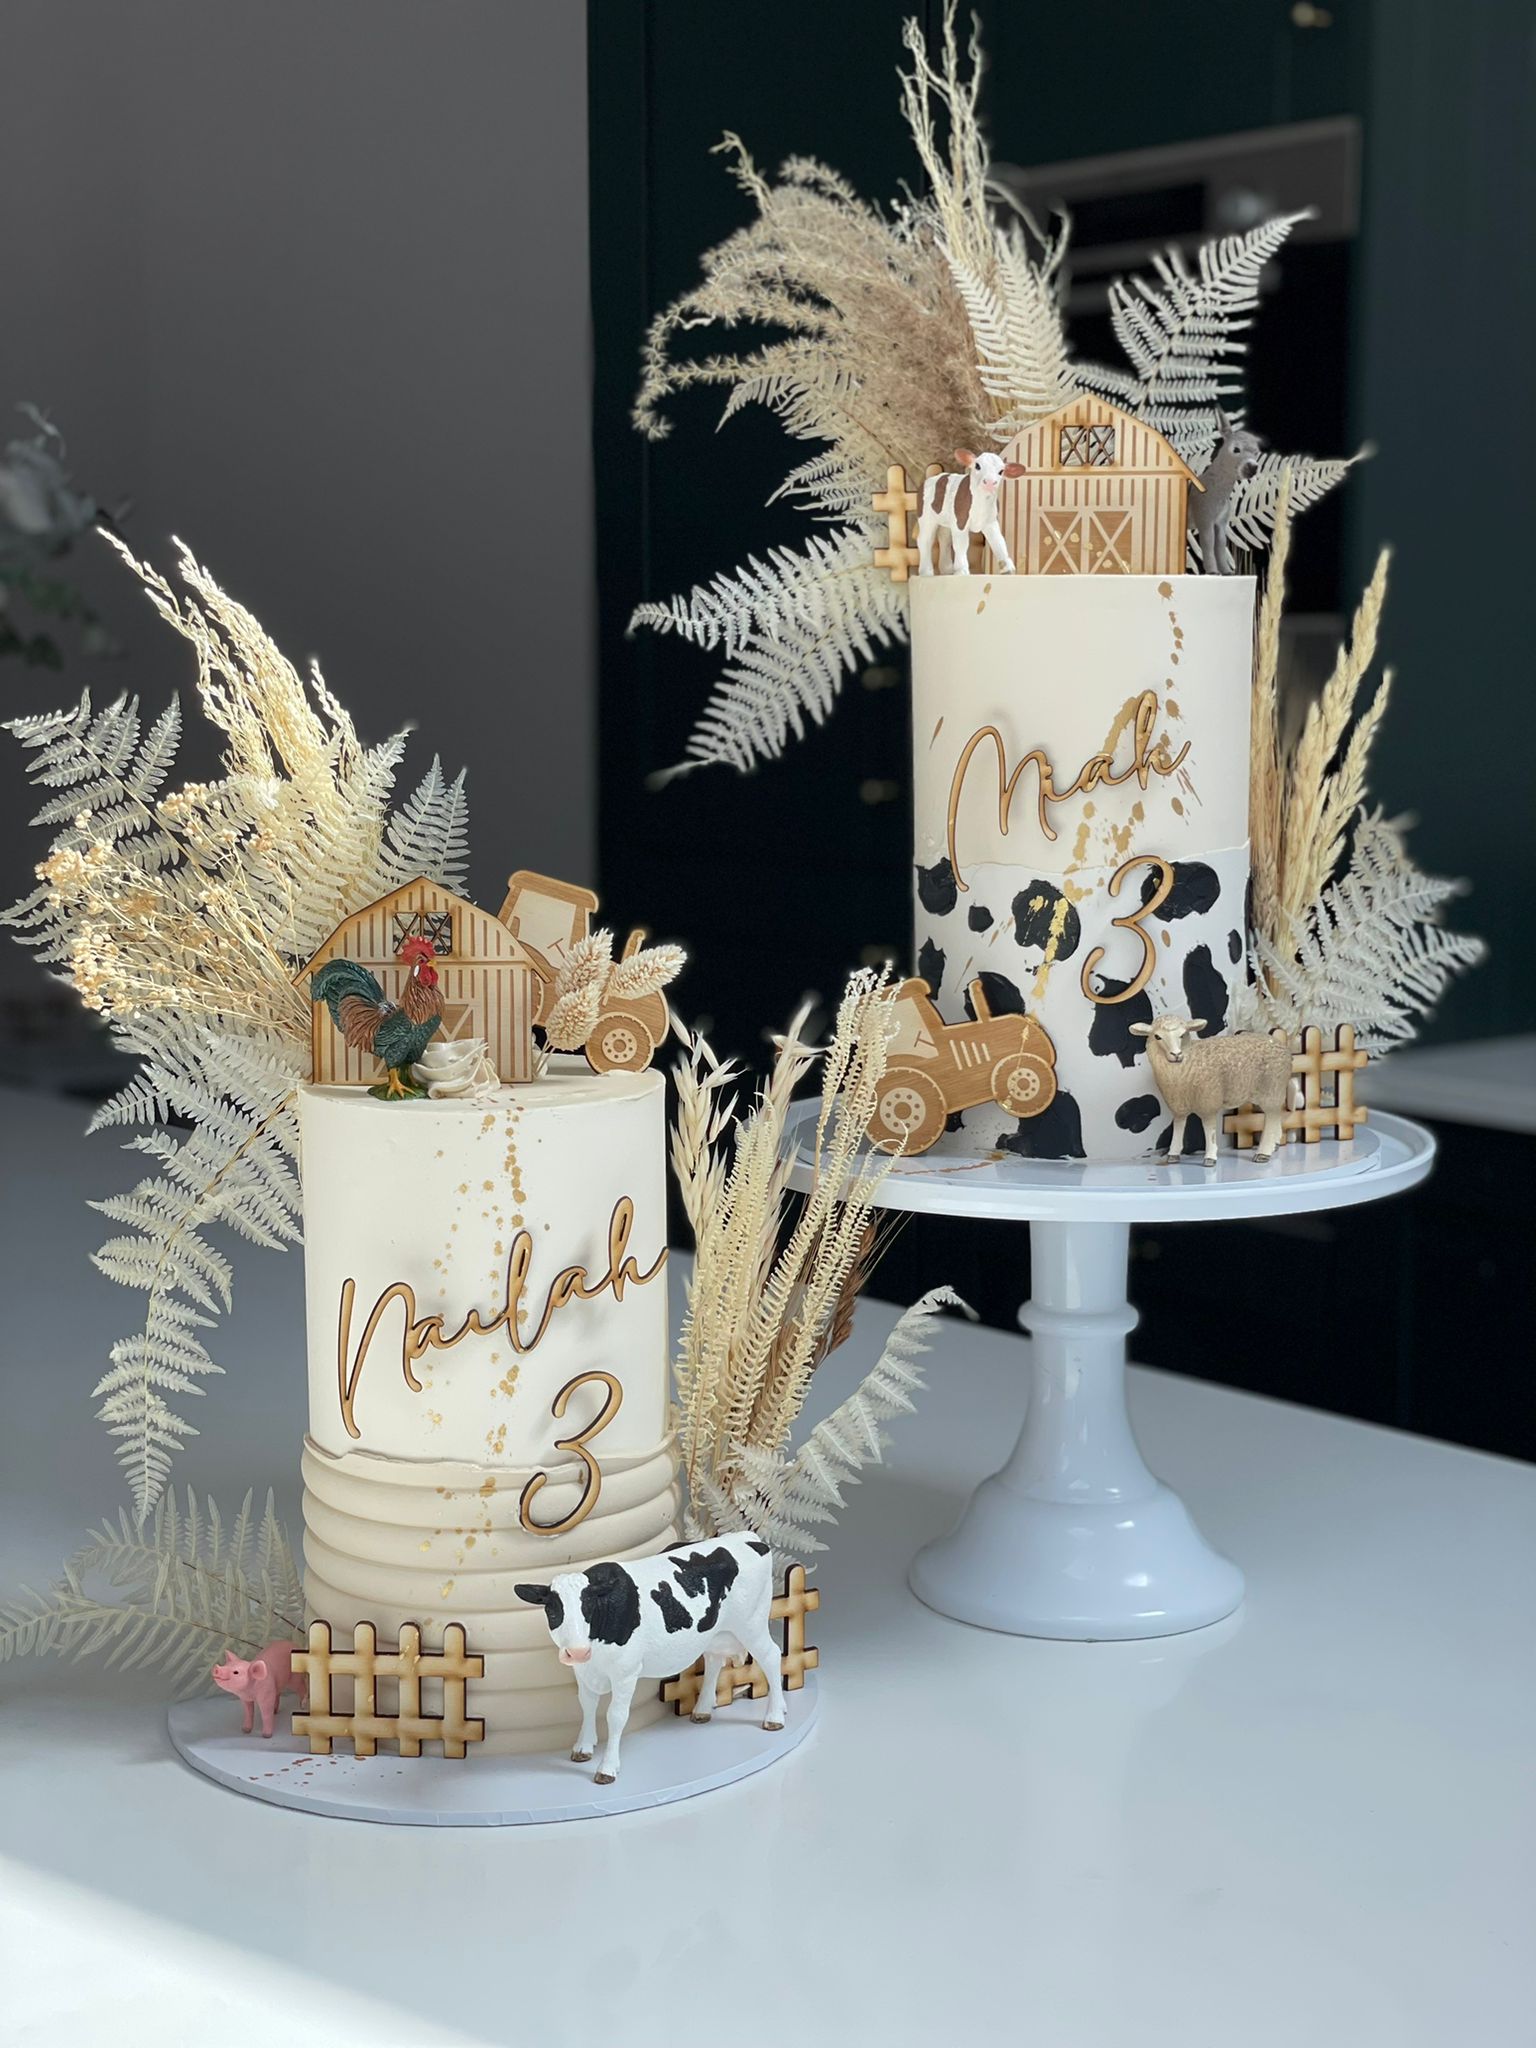 Exciting Birthday Cake Ideas to Make Your Celebration One-of-a-Kind